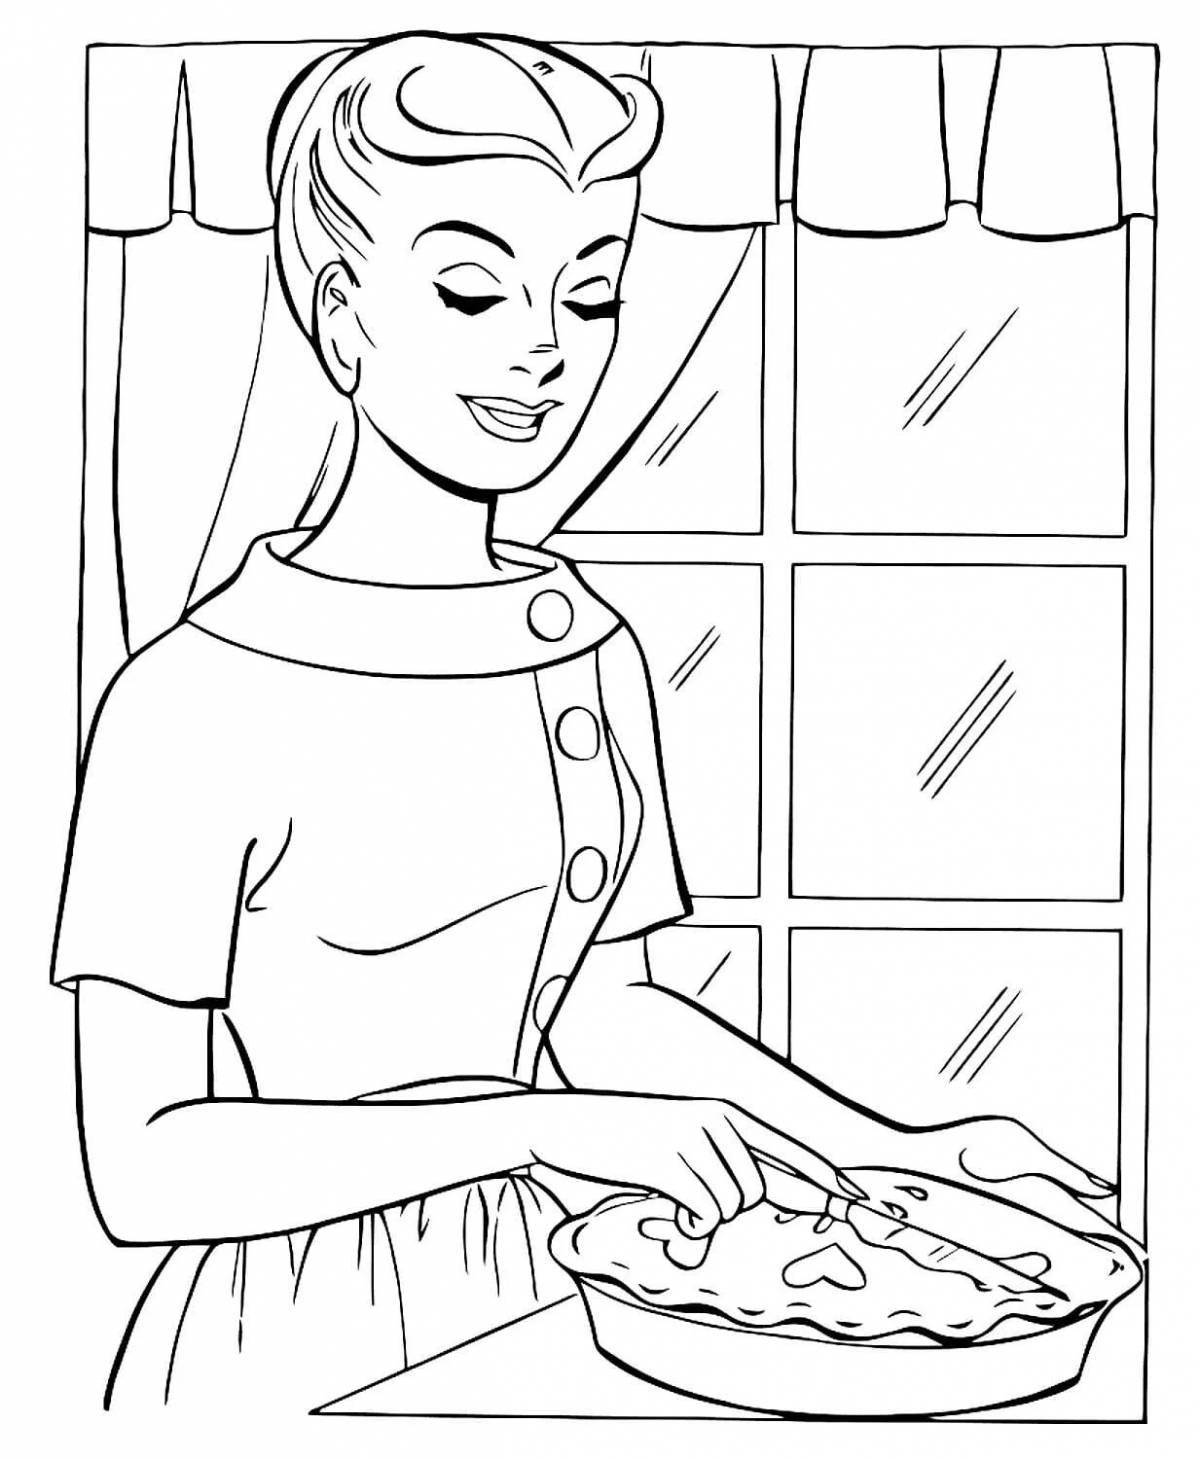 Coloring book appetizing cooking